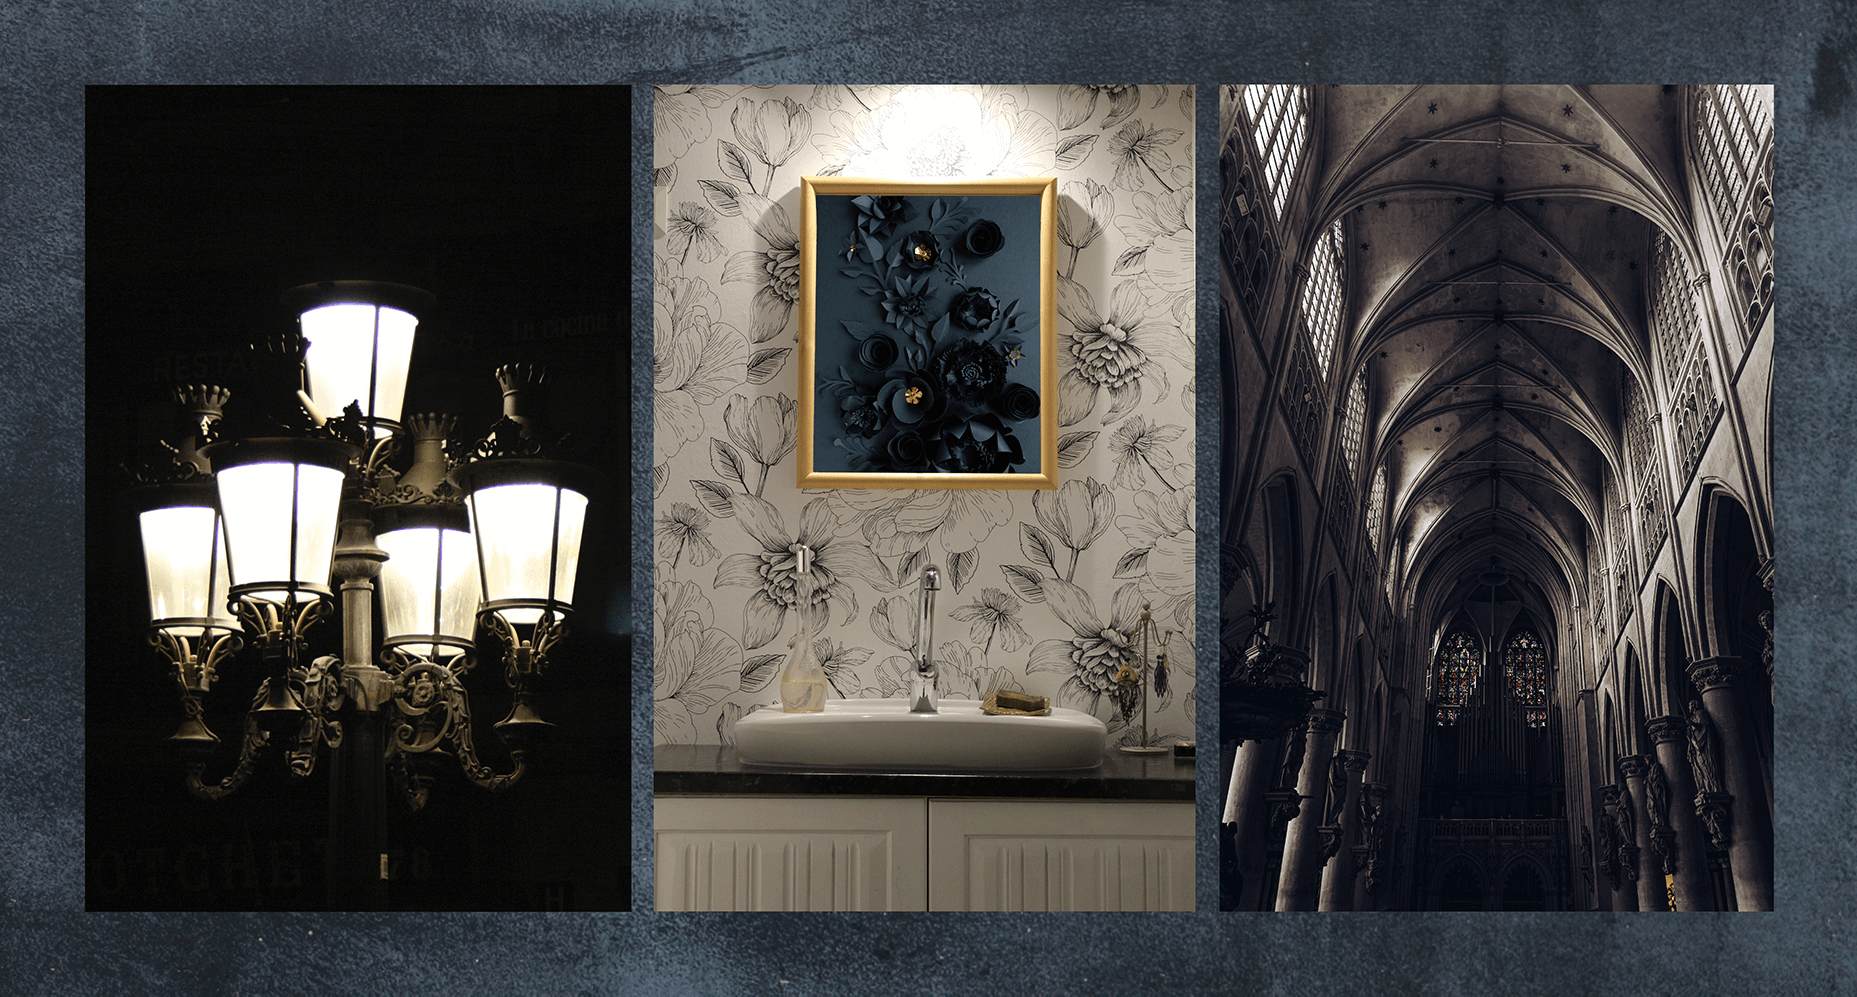 A row of images featuring Goth decor, including a gothic Victorian street lamp, a sink backsplash with black and white floral wallpaper, and a gothic cathedral's interior. 